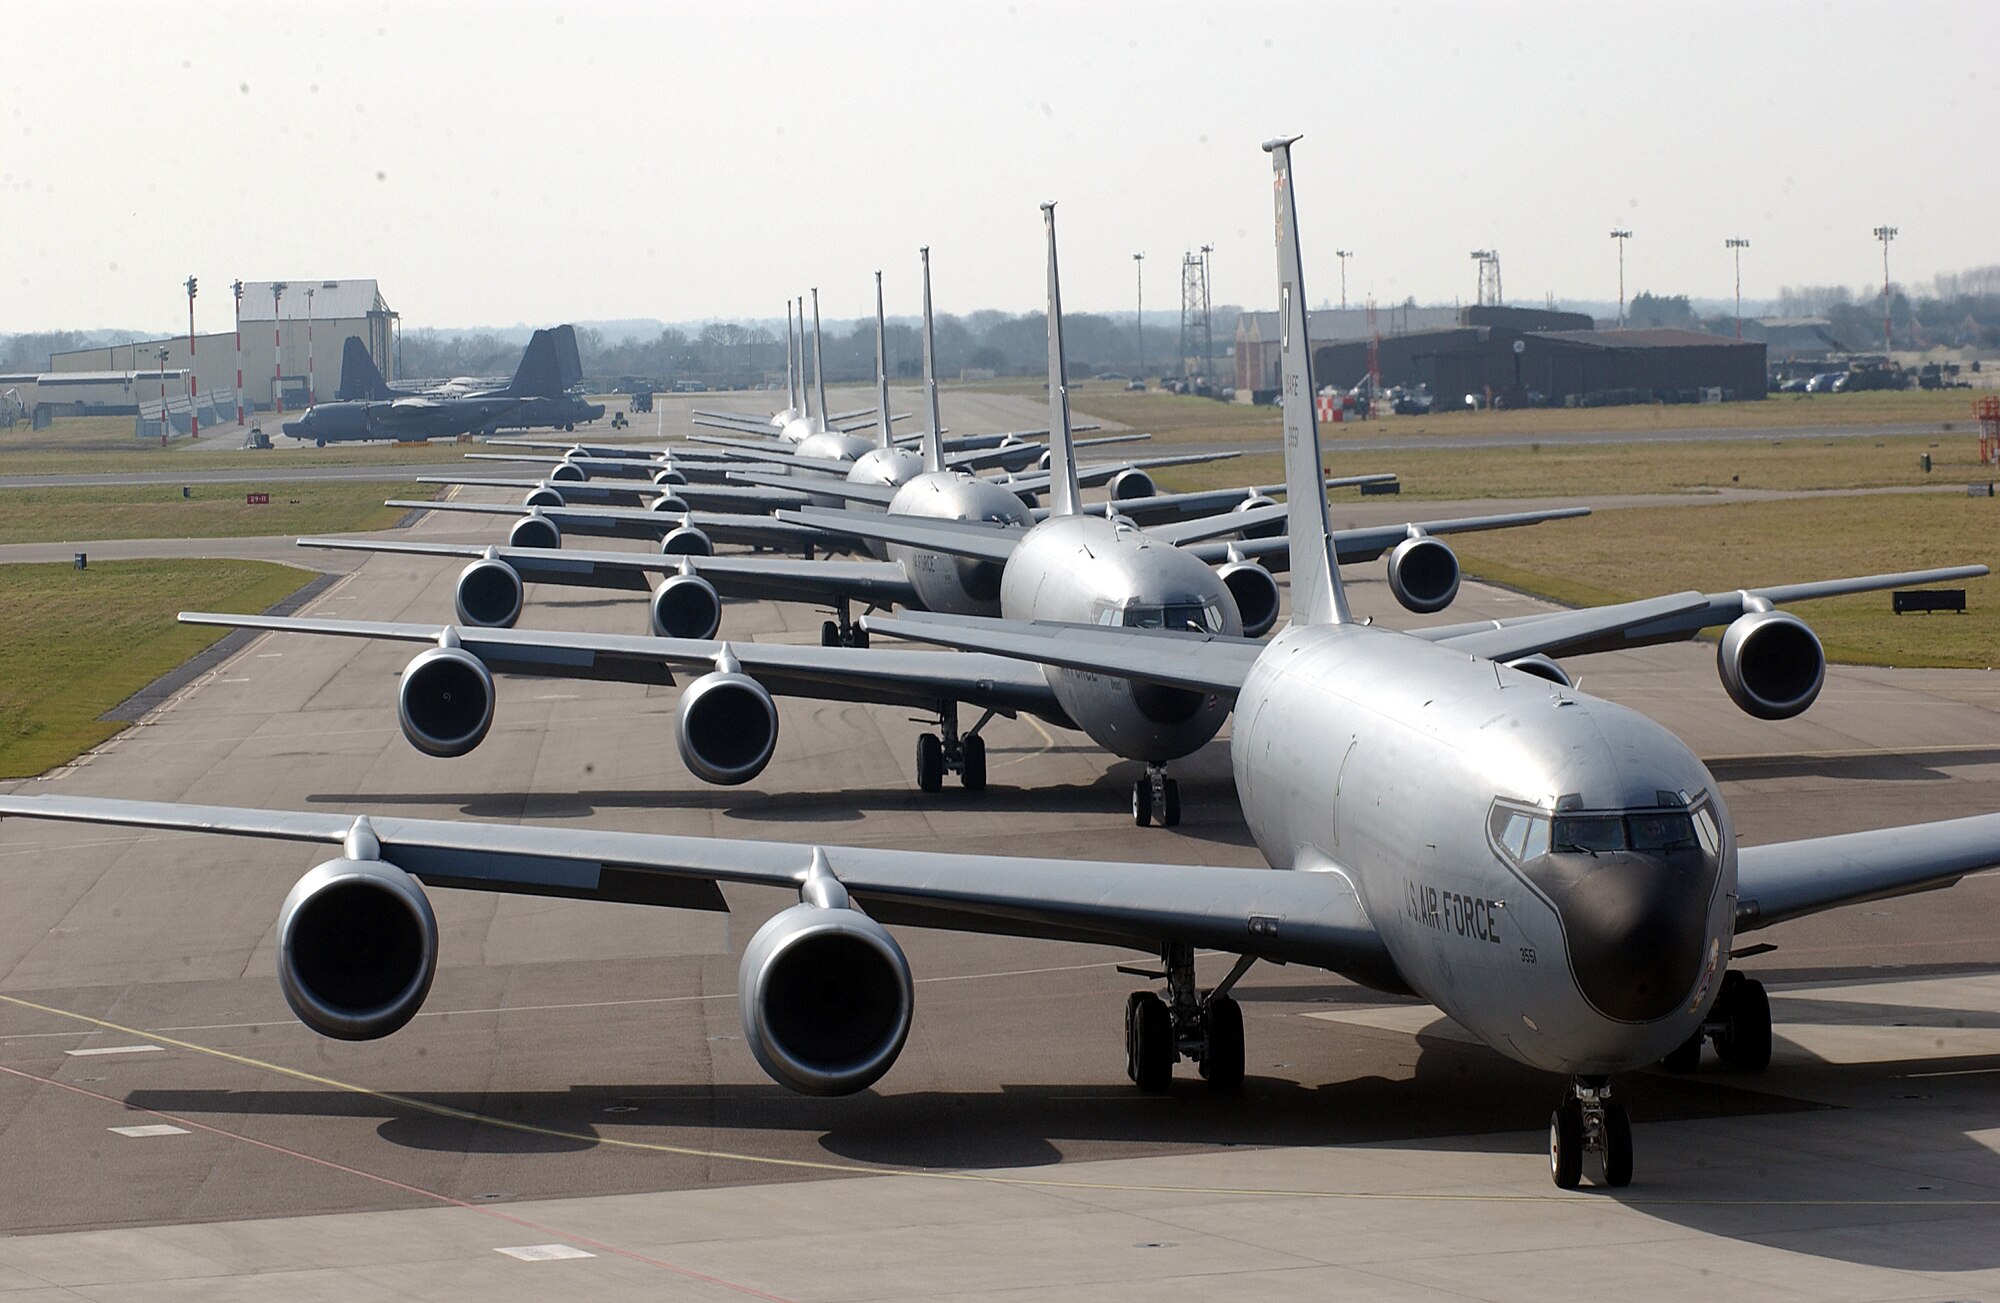 ROYAL AIR FORCE MILDENHALL, England – Six KC-135 Stratotankers move on the taxiway as part of a training mission to validate maintenance and operational capabilities.  According to regulations and safety reasons, the formation of six is the maximum number of aircraft allowed to take off together. The training mission demonstrated Team Mildenhall’s quick response capability as the only Air Force refueling wing in Europe. (Photo by Staff Sergeant Jeanette Copeland)